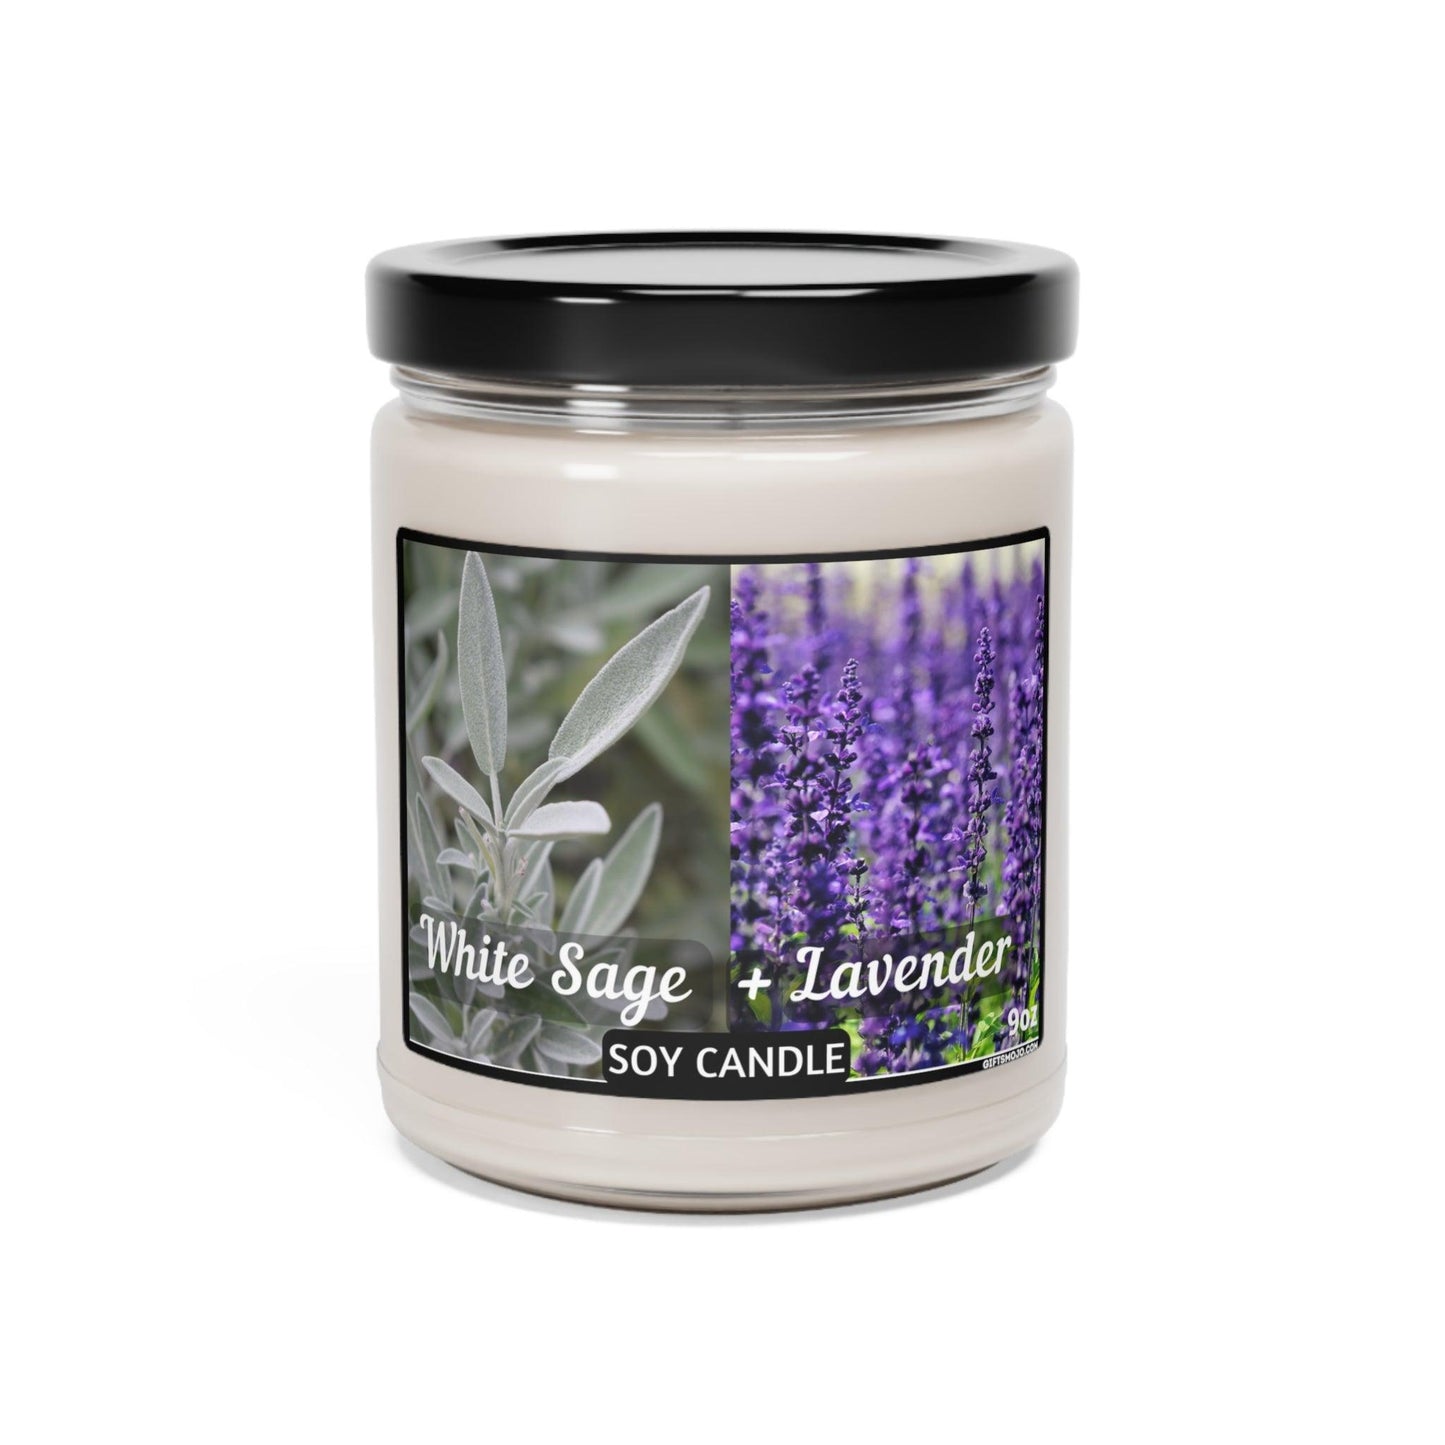 Scented Soy Candle Cinnamon Vanilla, White Sage Lavender, Apple Harvest, Clean Cotton, Sea Salt Orchid, 9oz, - Giftsmojo